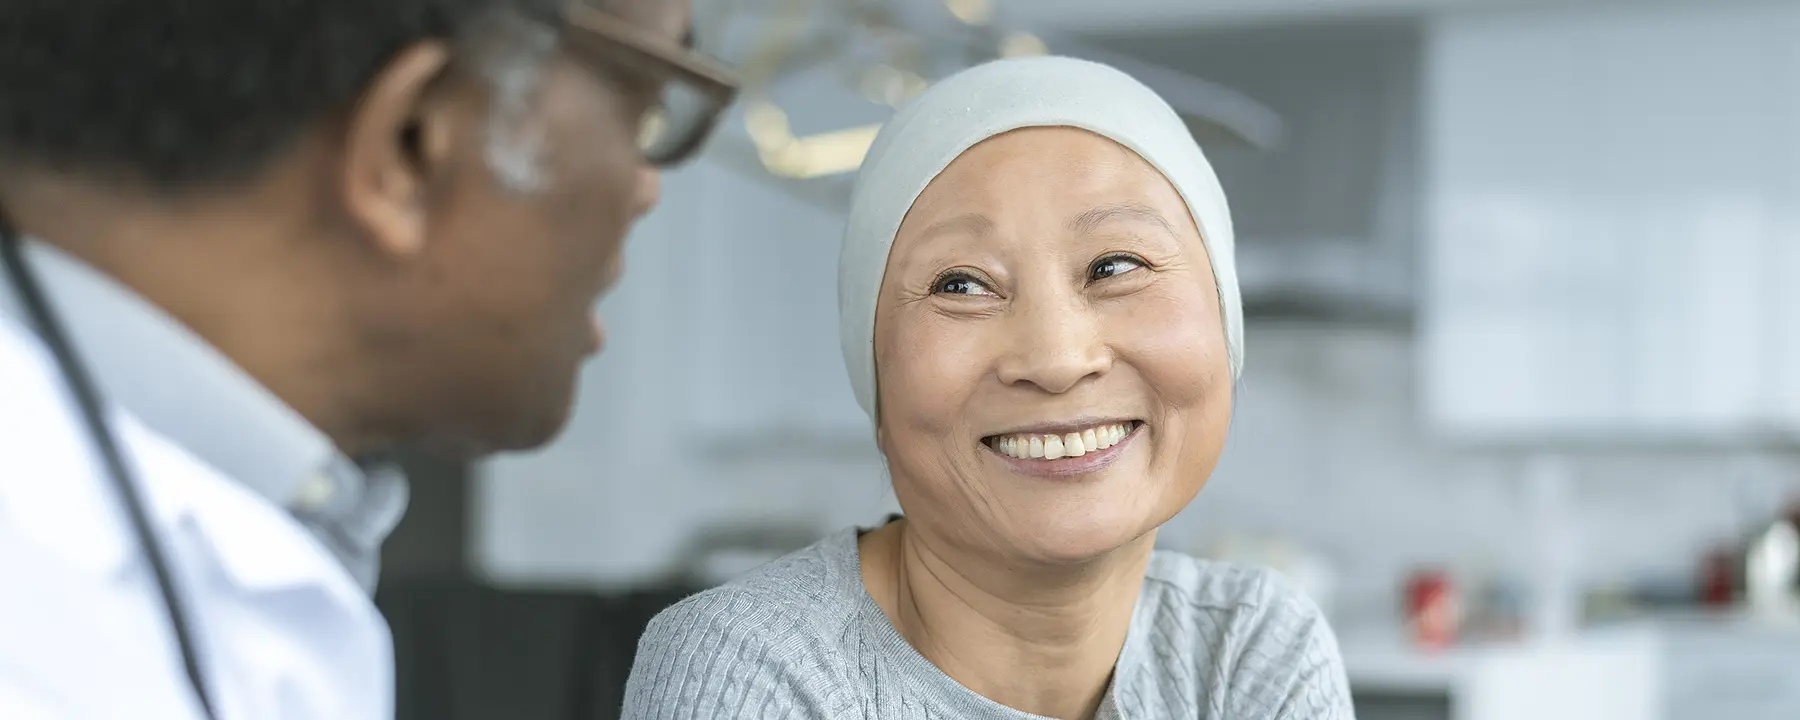 A cancer patient smiles at her doctor.